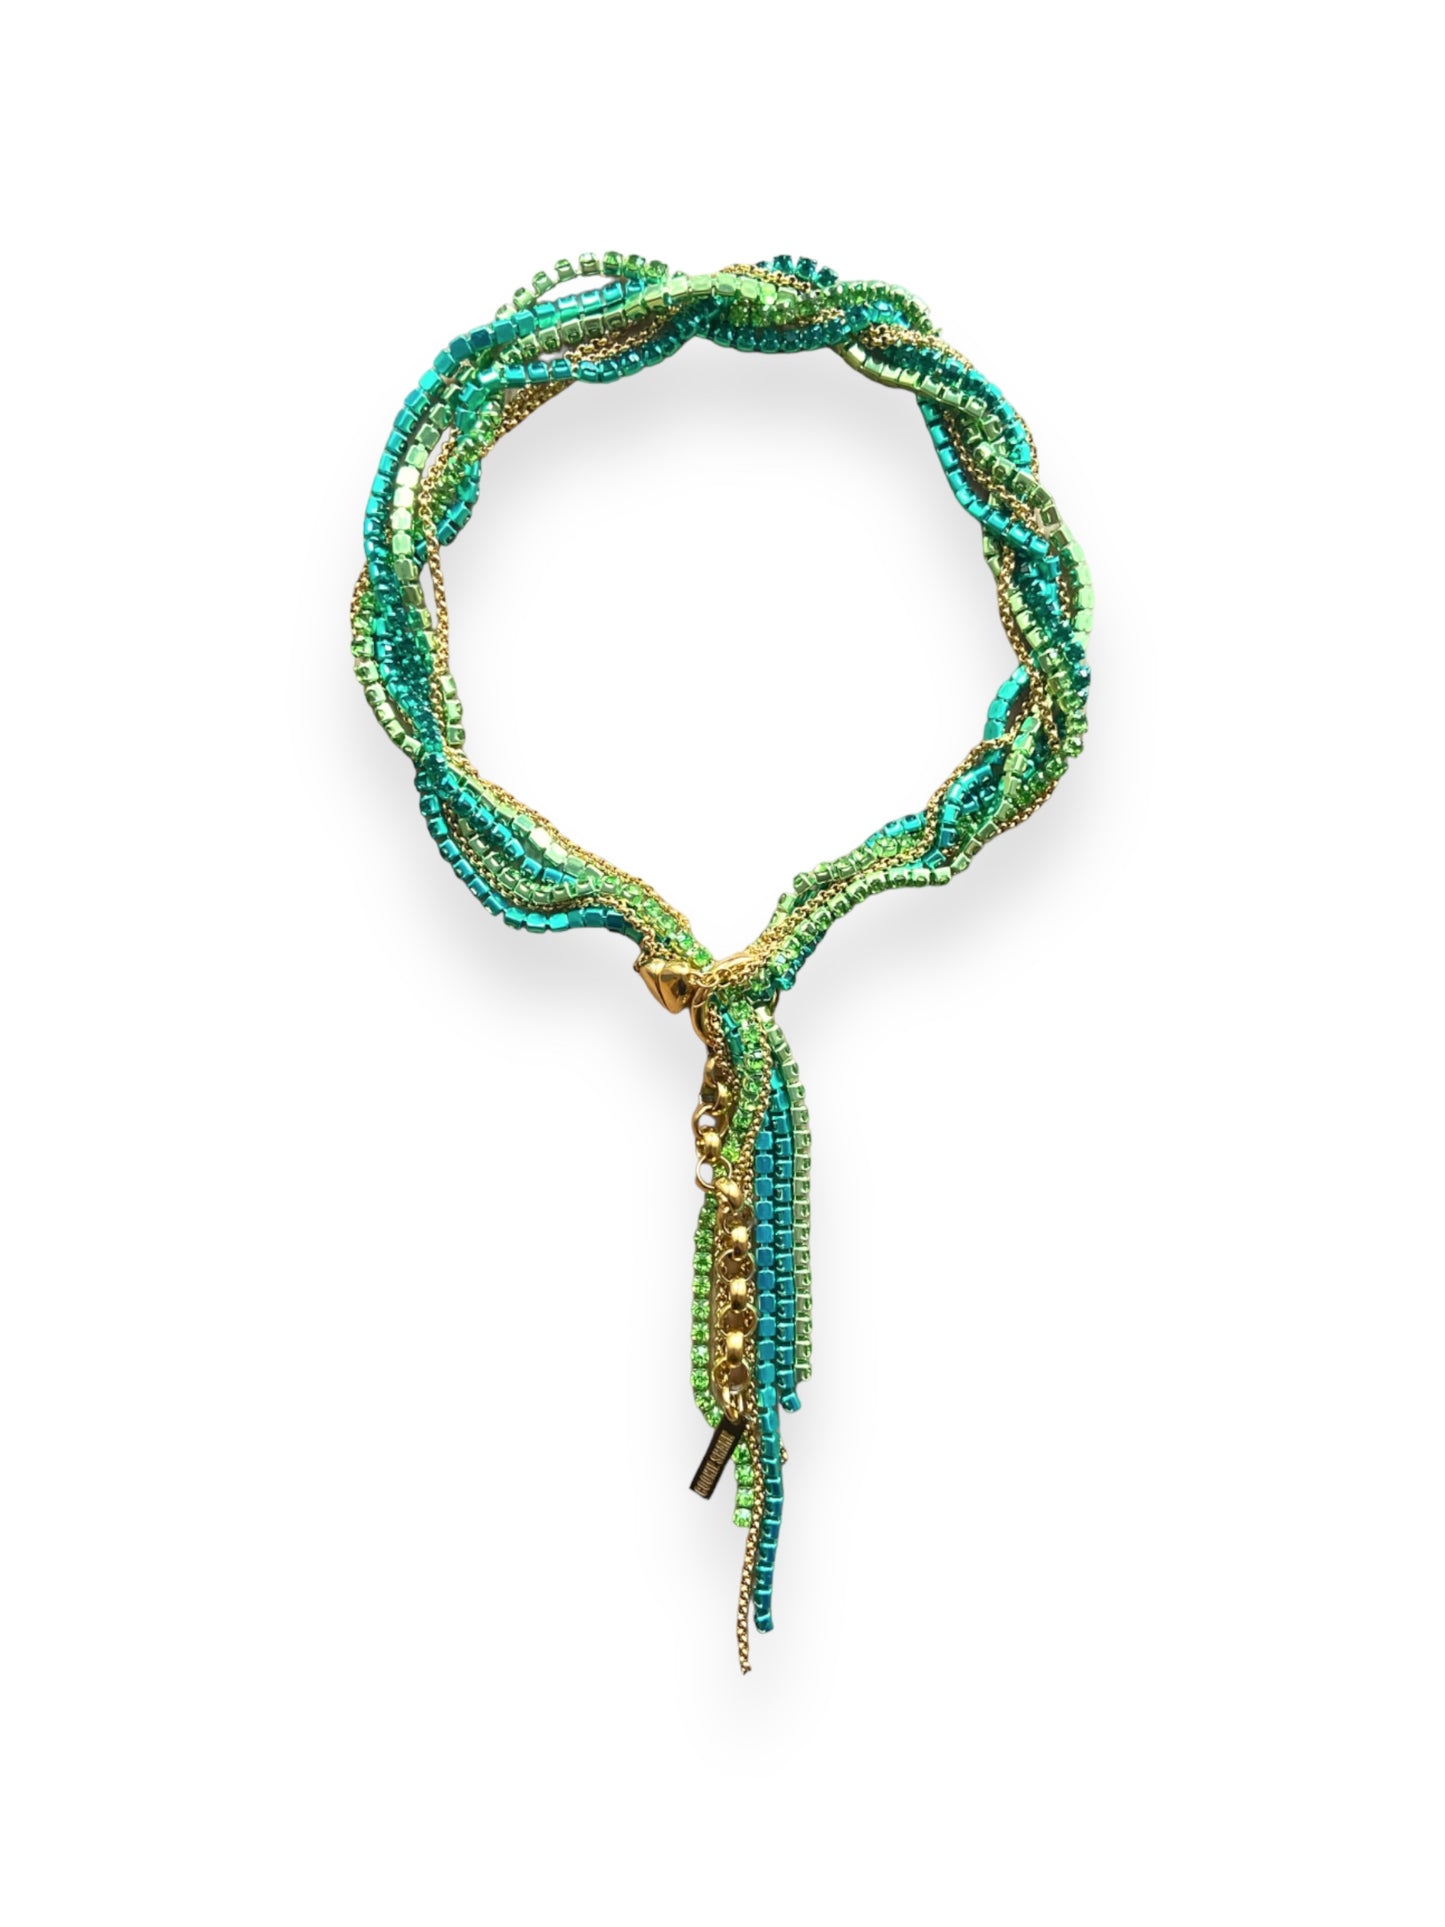 COLLIER RIVIERE - VERT TURQUOISE